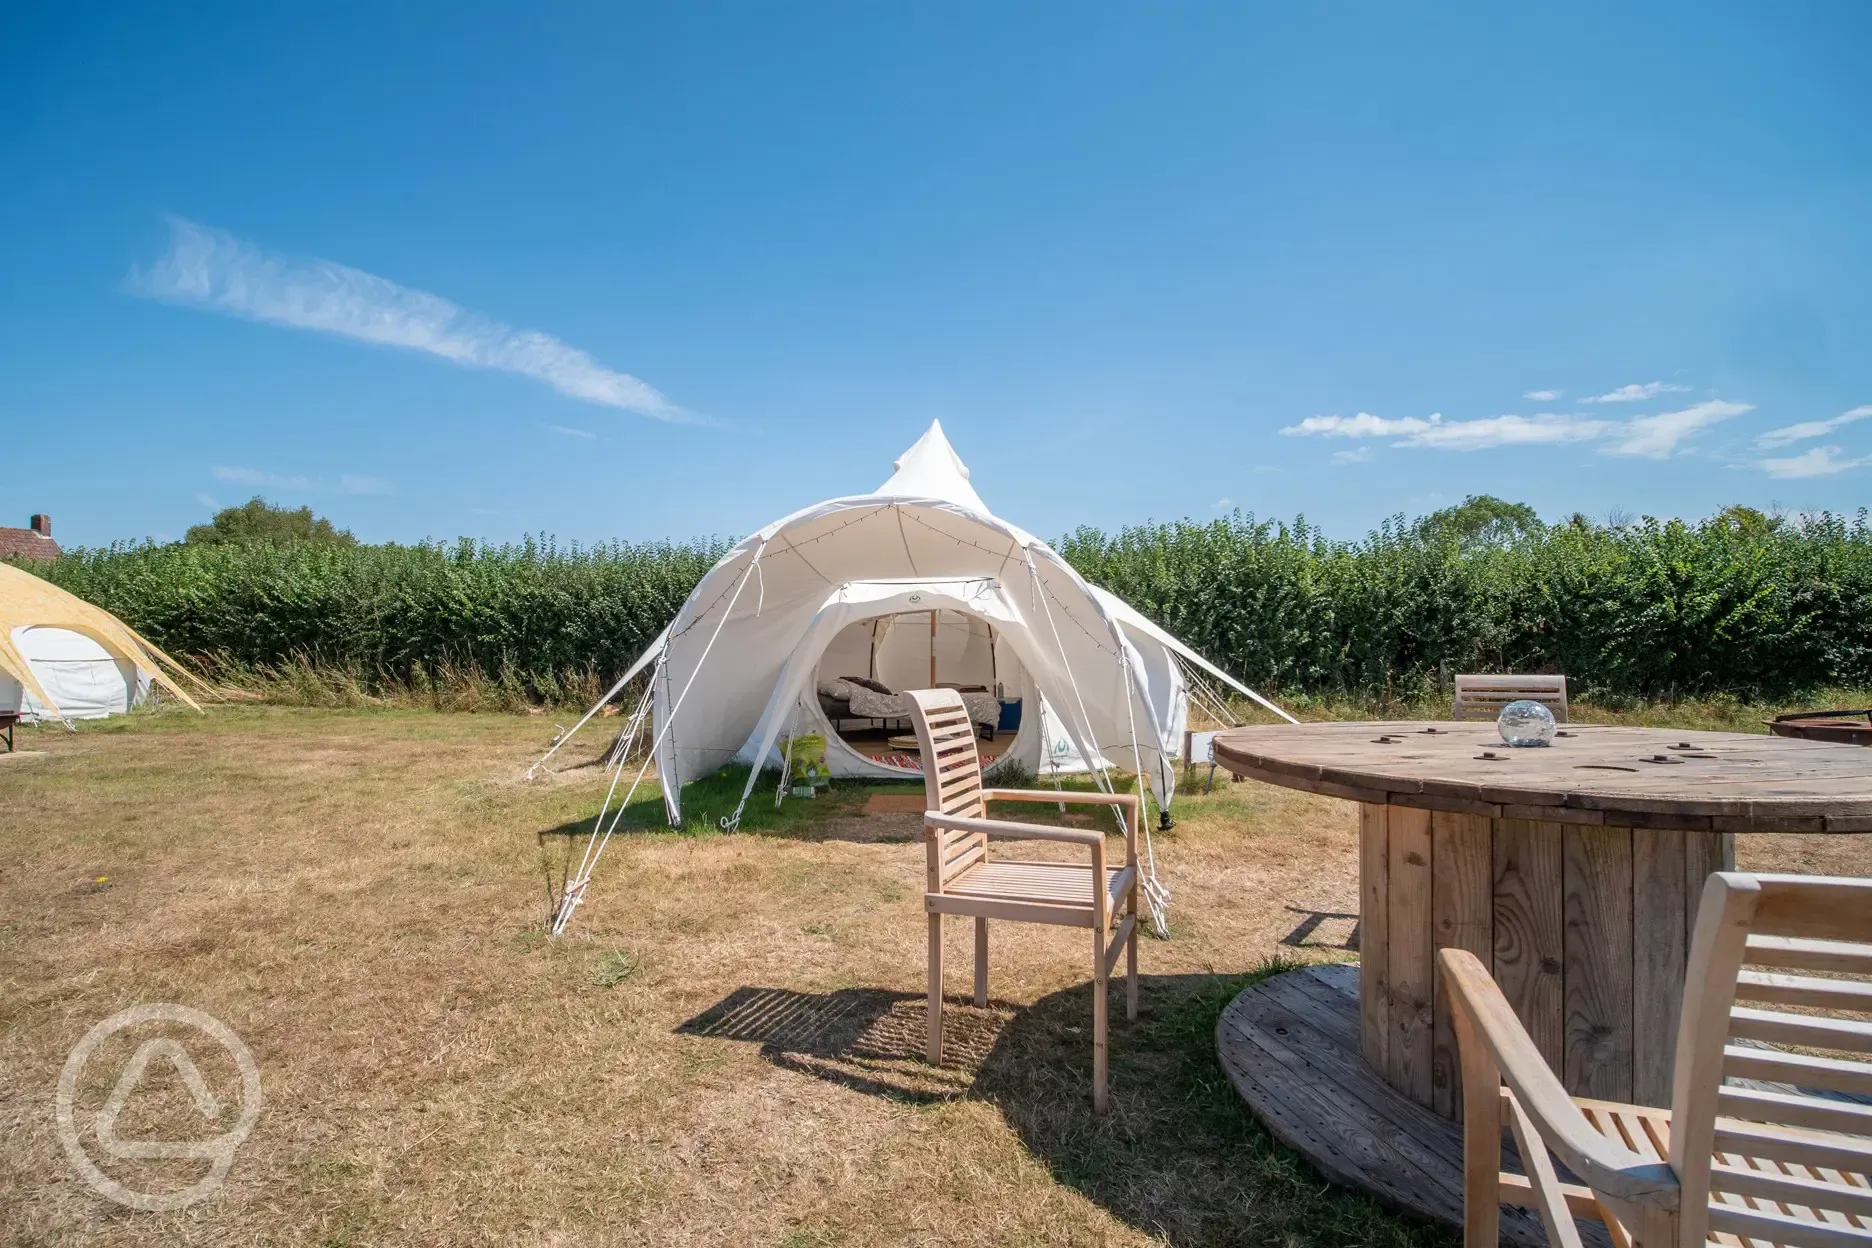 Standard bell tent picnic table